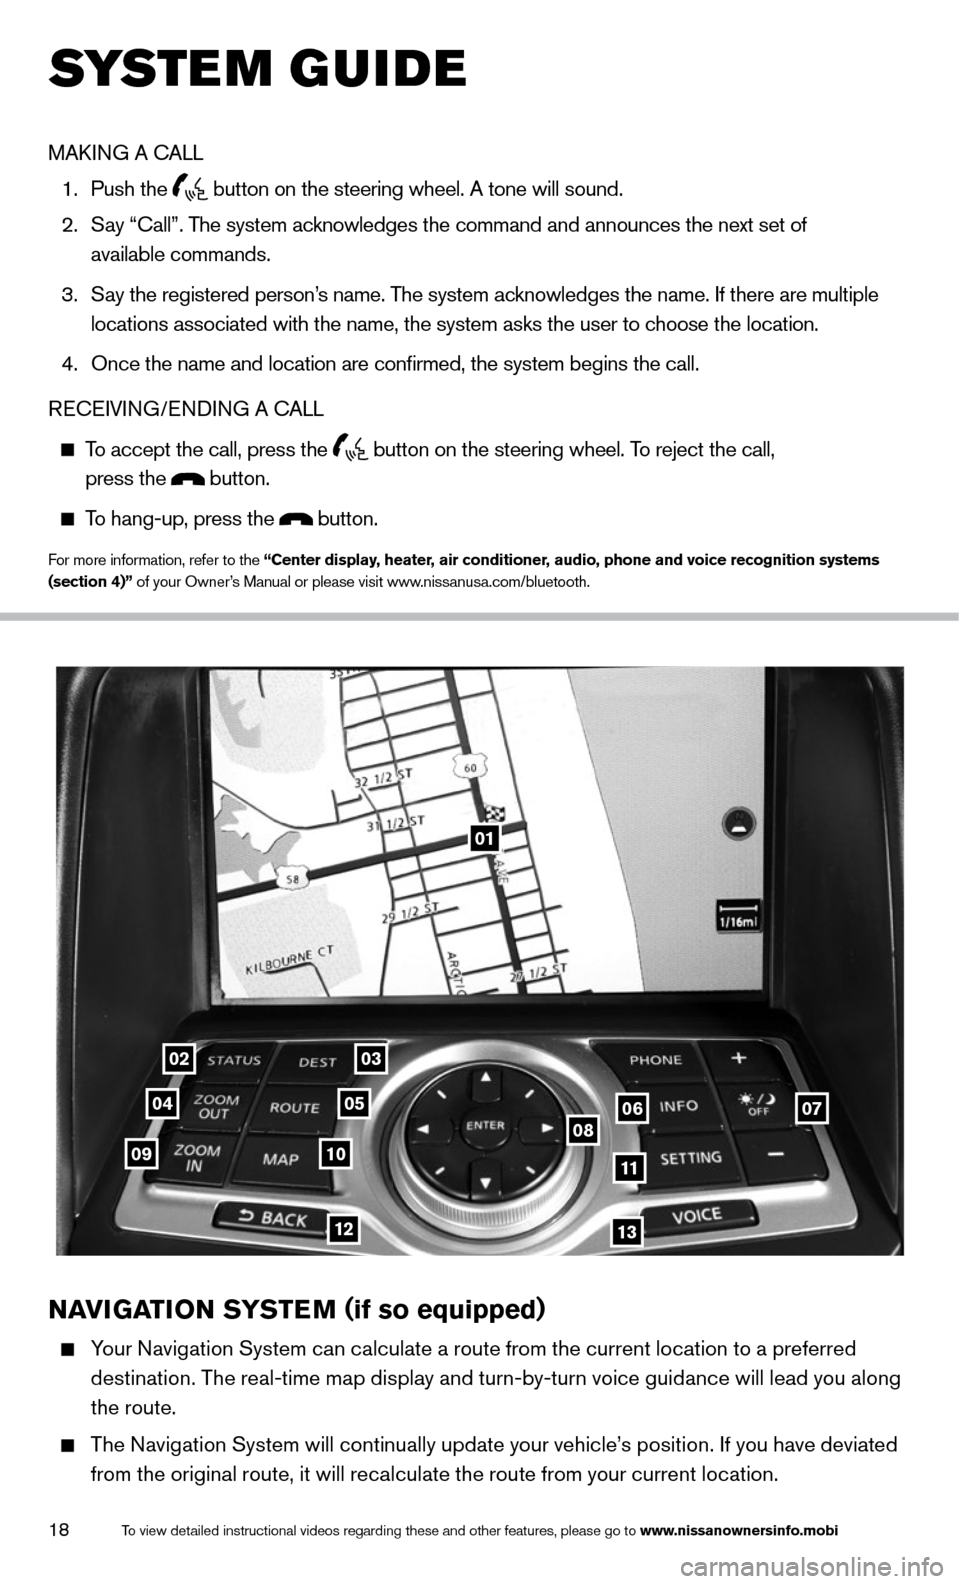 NISSAN 370Z COUPE 2014 Z34 Quick Reference Guide 18
01
0203
0405060708091011
1213
NAVIGATION SYSTEM (if so equipped)
     Your Navigation System can calculate a route from the current location to a preferred 
destination. The real-time map display a